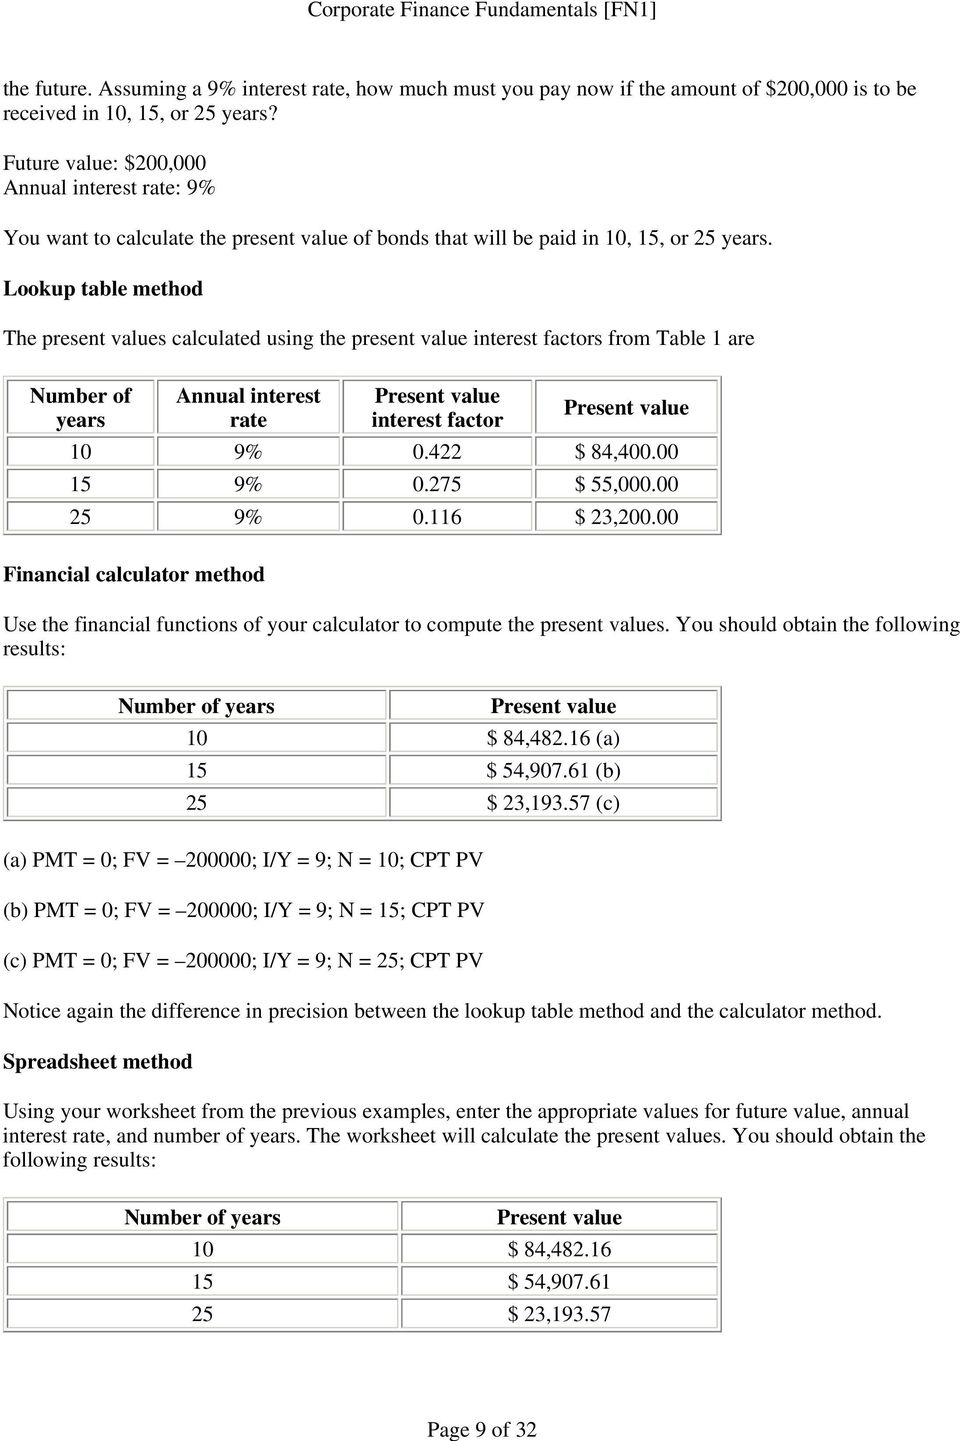 Lookup table method The present values calculated using the present value interest factors from Table 1 are Number of years Annual interest rate Present value interest factor Present value 10 9% 0.